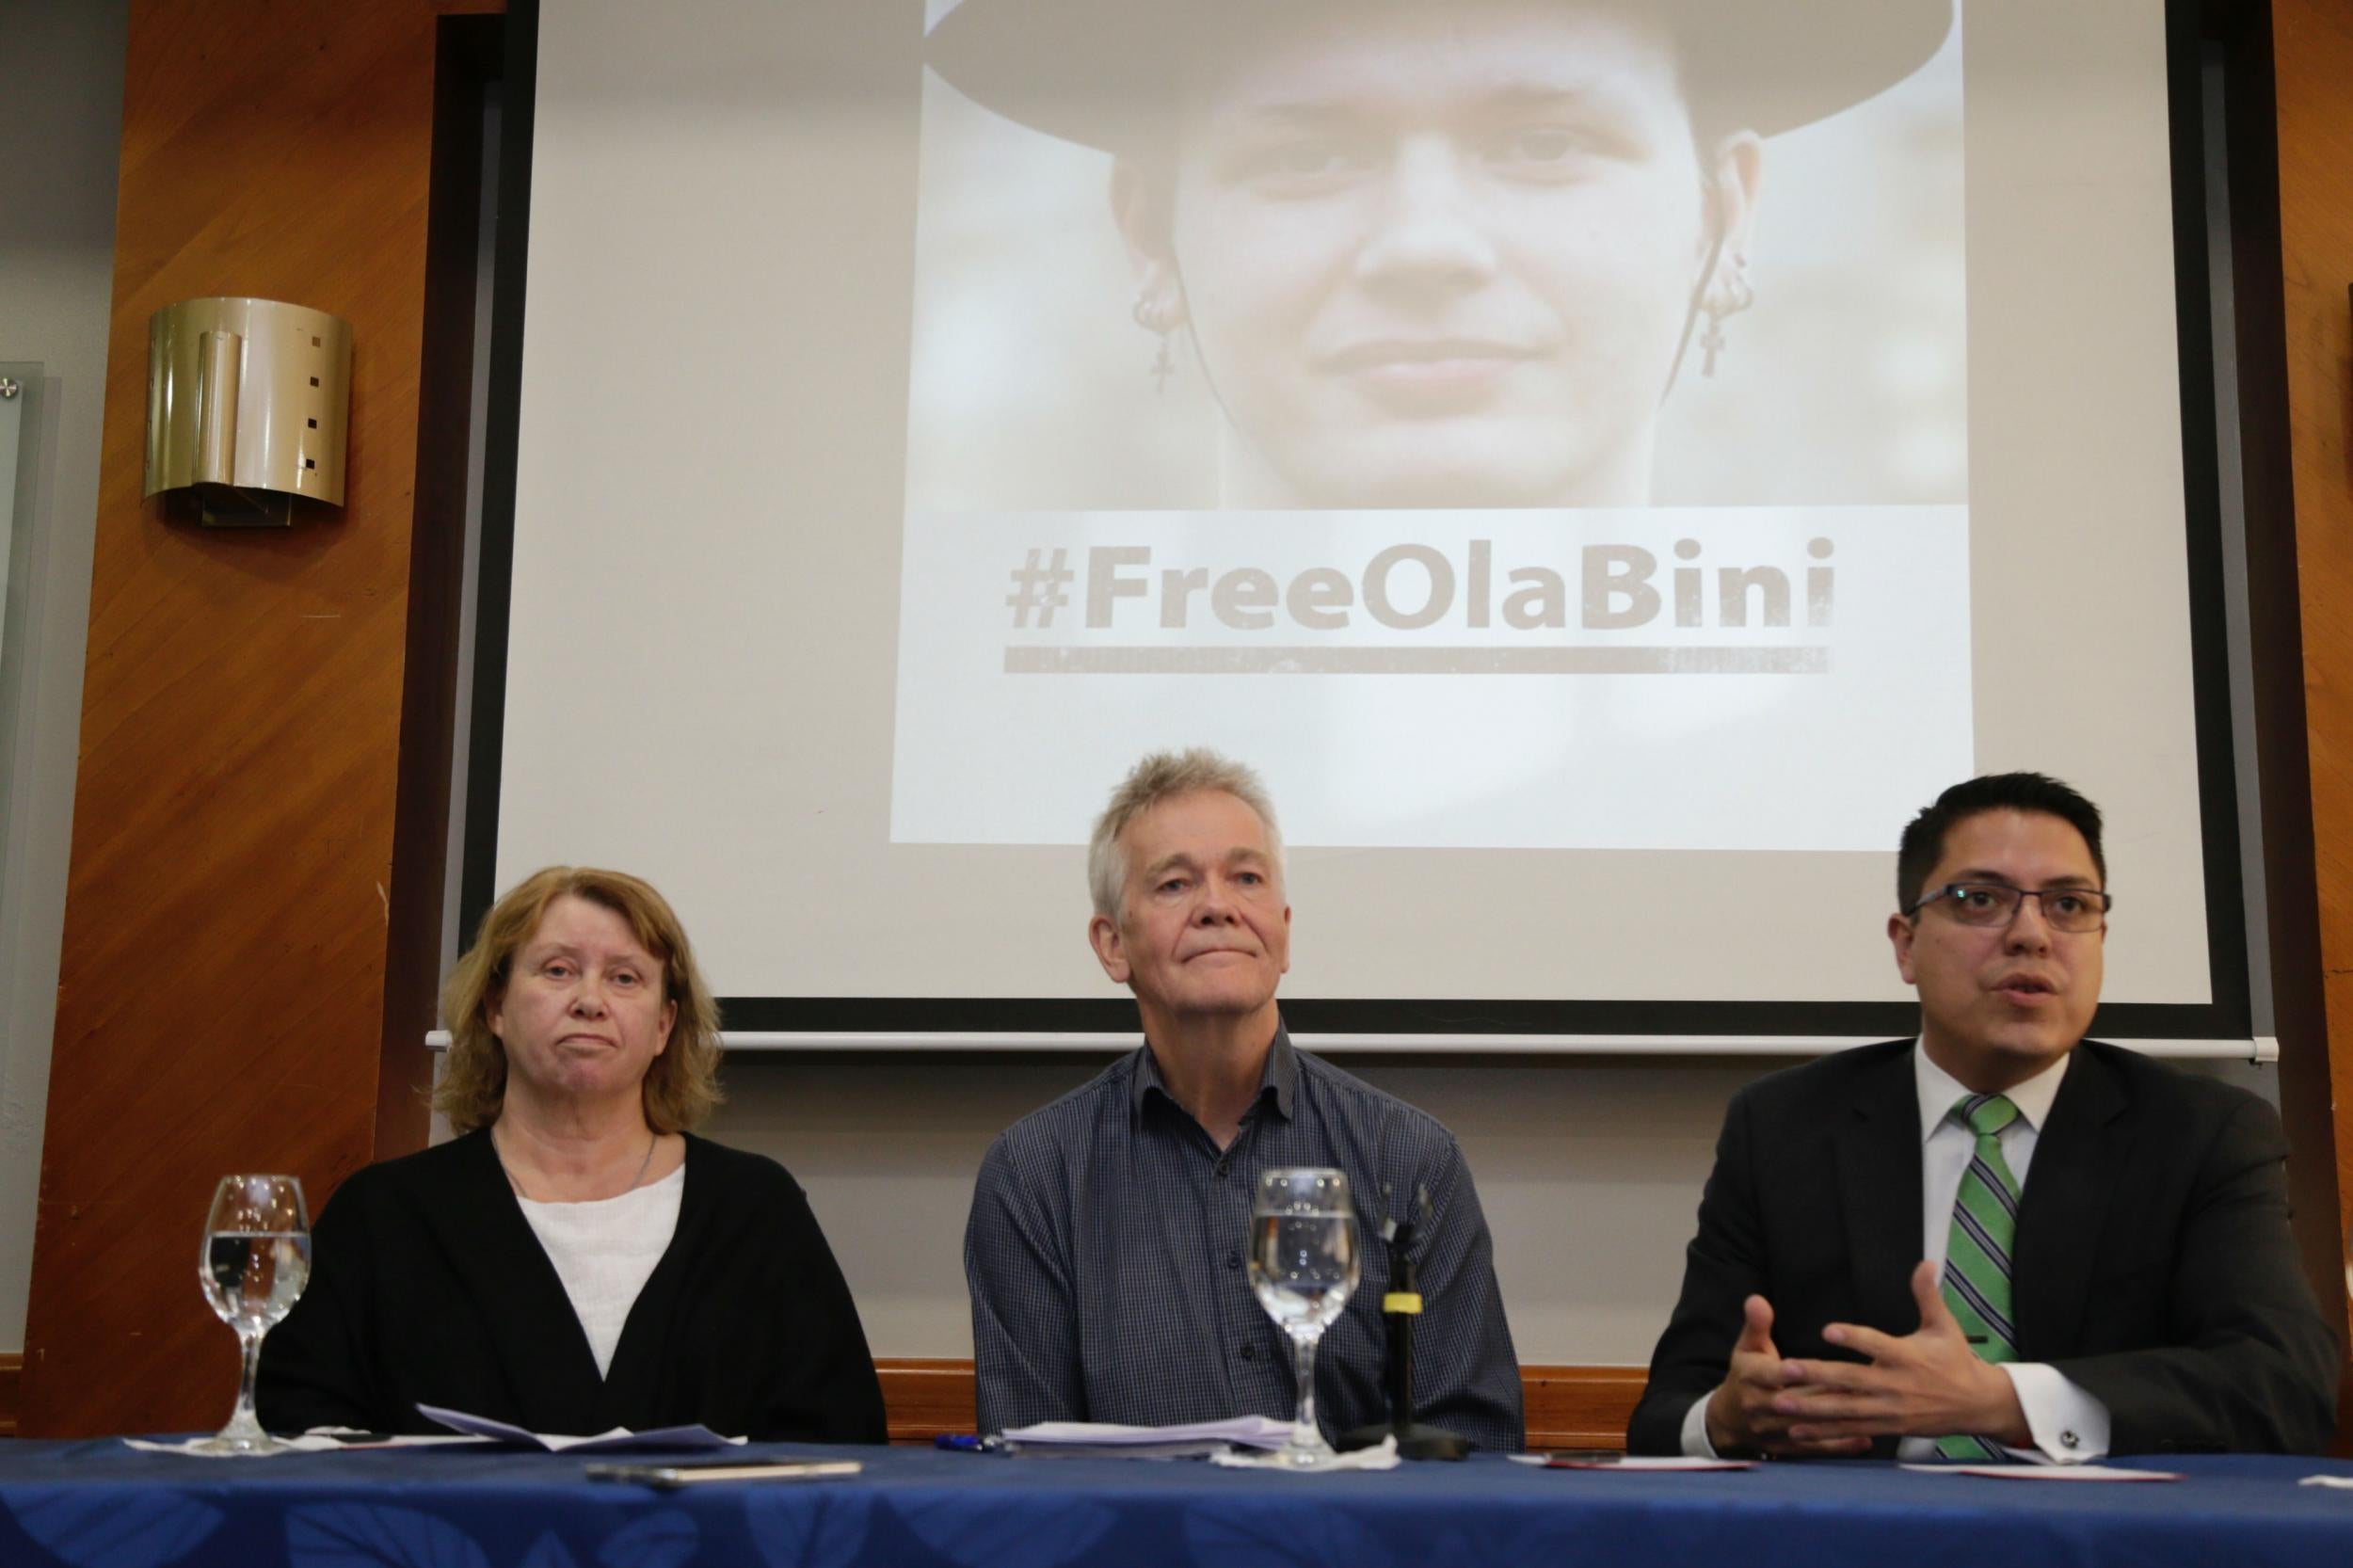 Ola Bini: Wikileaks collaborator and Assange ally accused of plotting to blackmail Ecuador president faces 'threats in jail', parents say